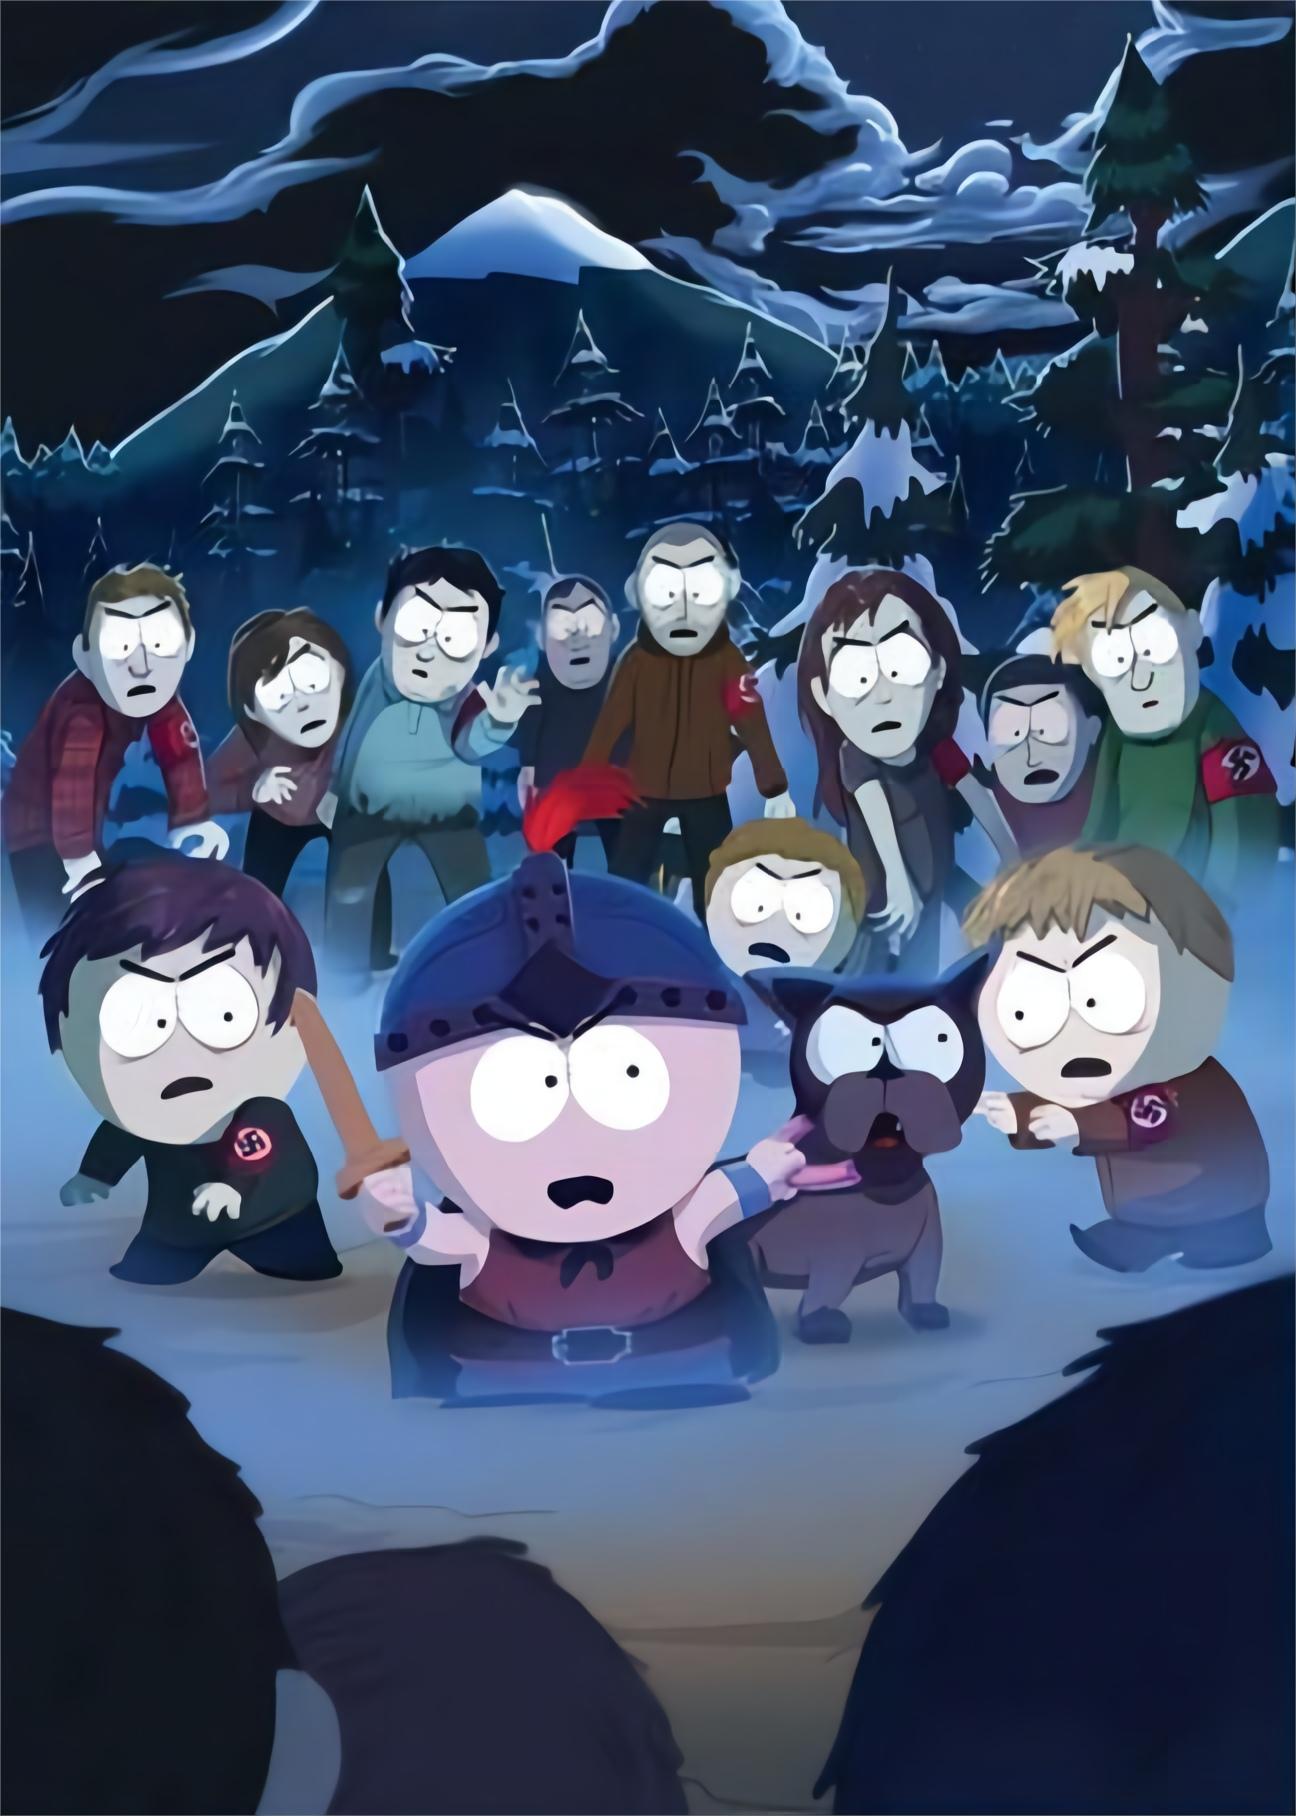 South Park The Stick Of Truth 40*50CM(Canvas) Full Round Drill Diamond Painting gbfke